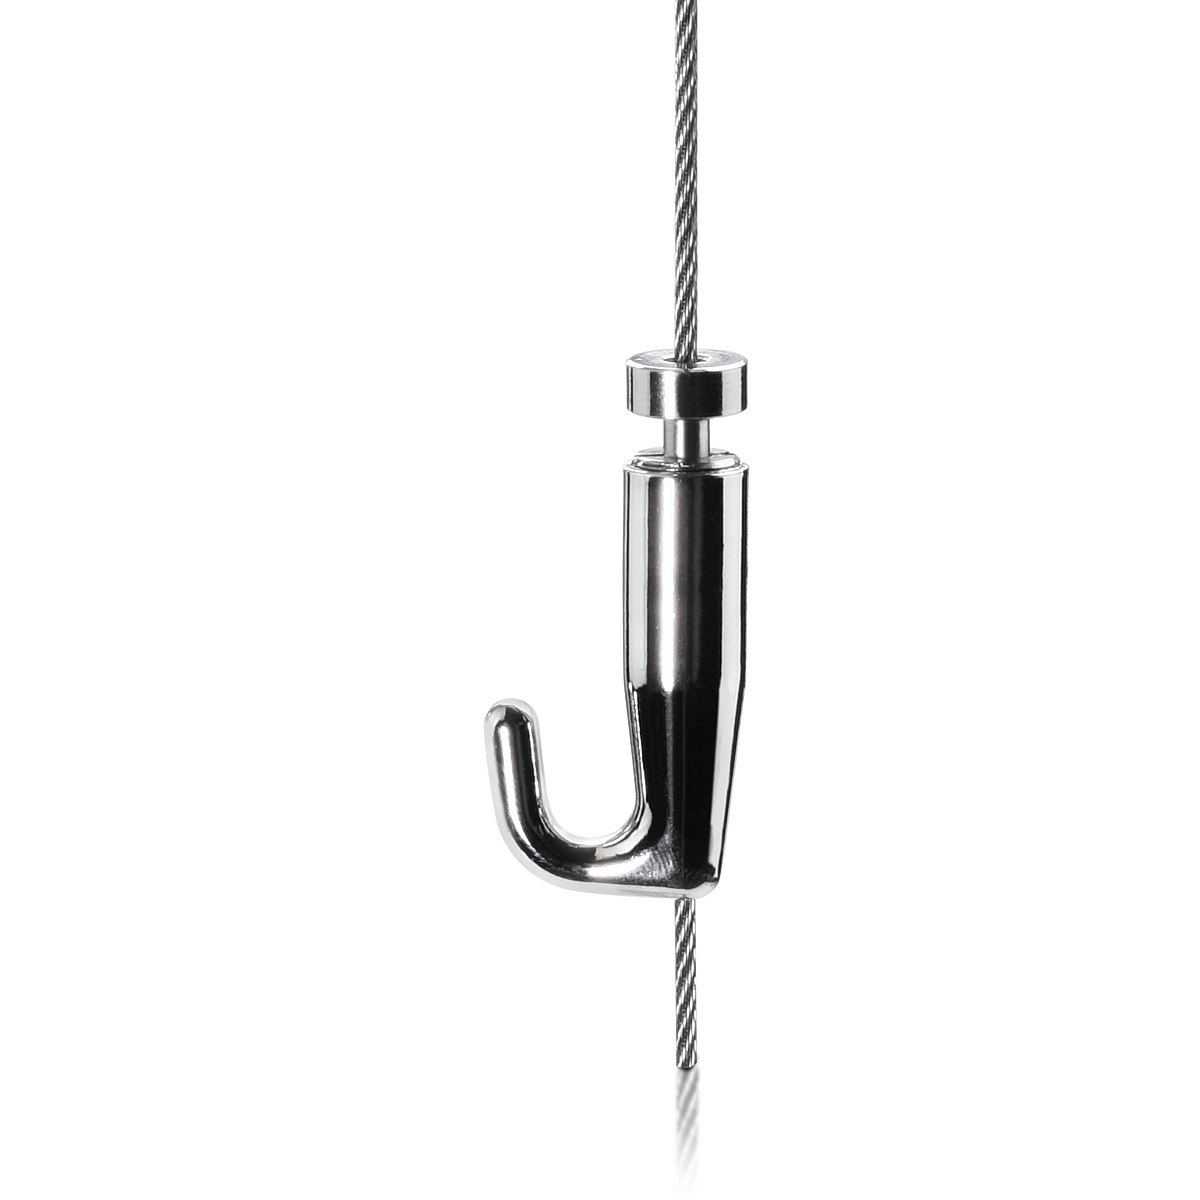 Self-Gripping Anchor Hook ''Nickel Plating'' Finish  (For Cable Diameter 0.06'' to 0.08'')